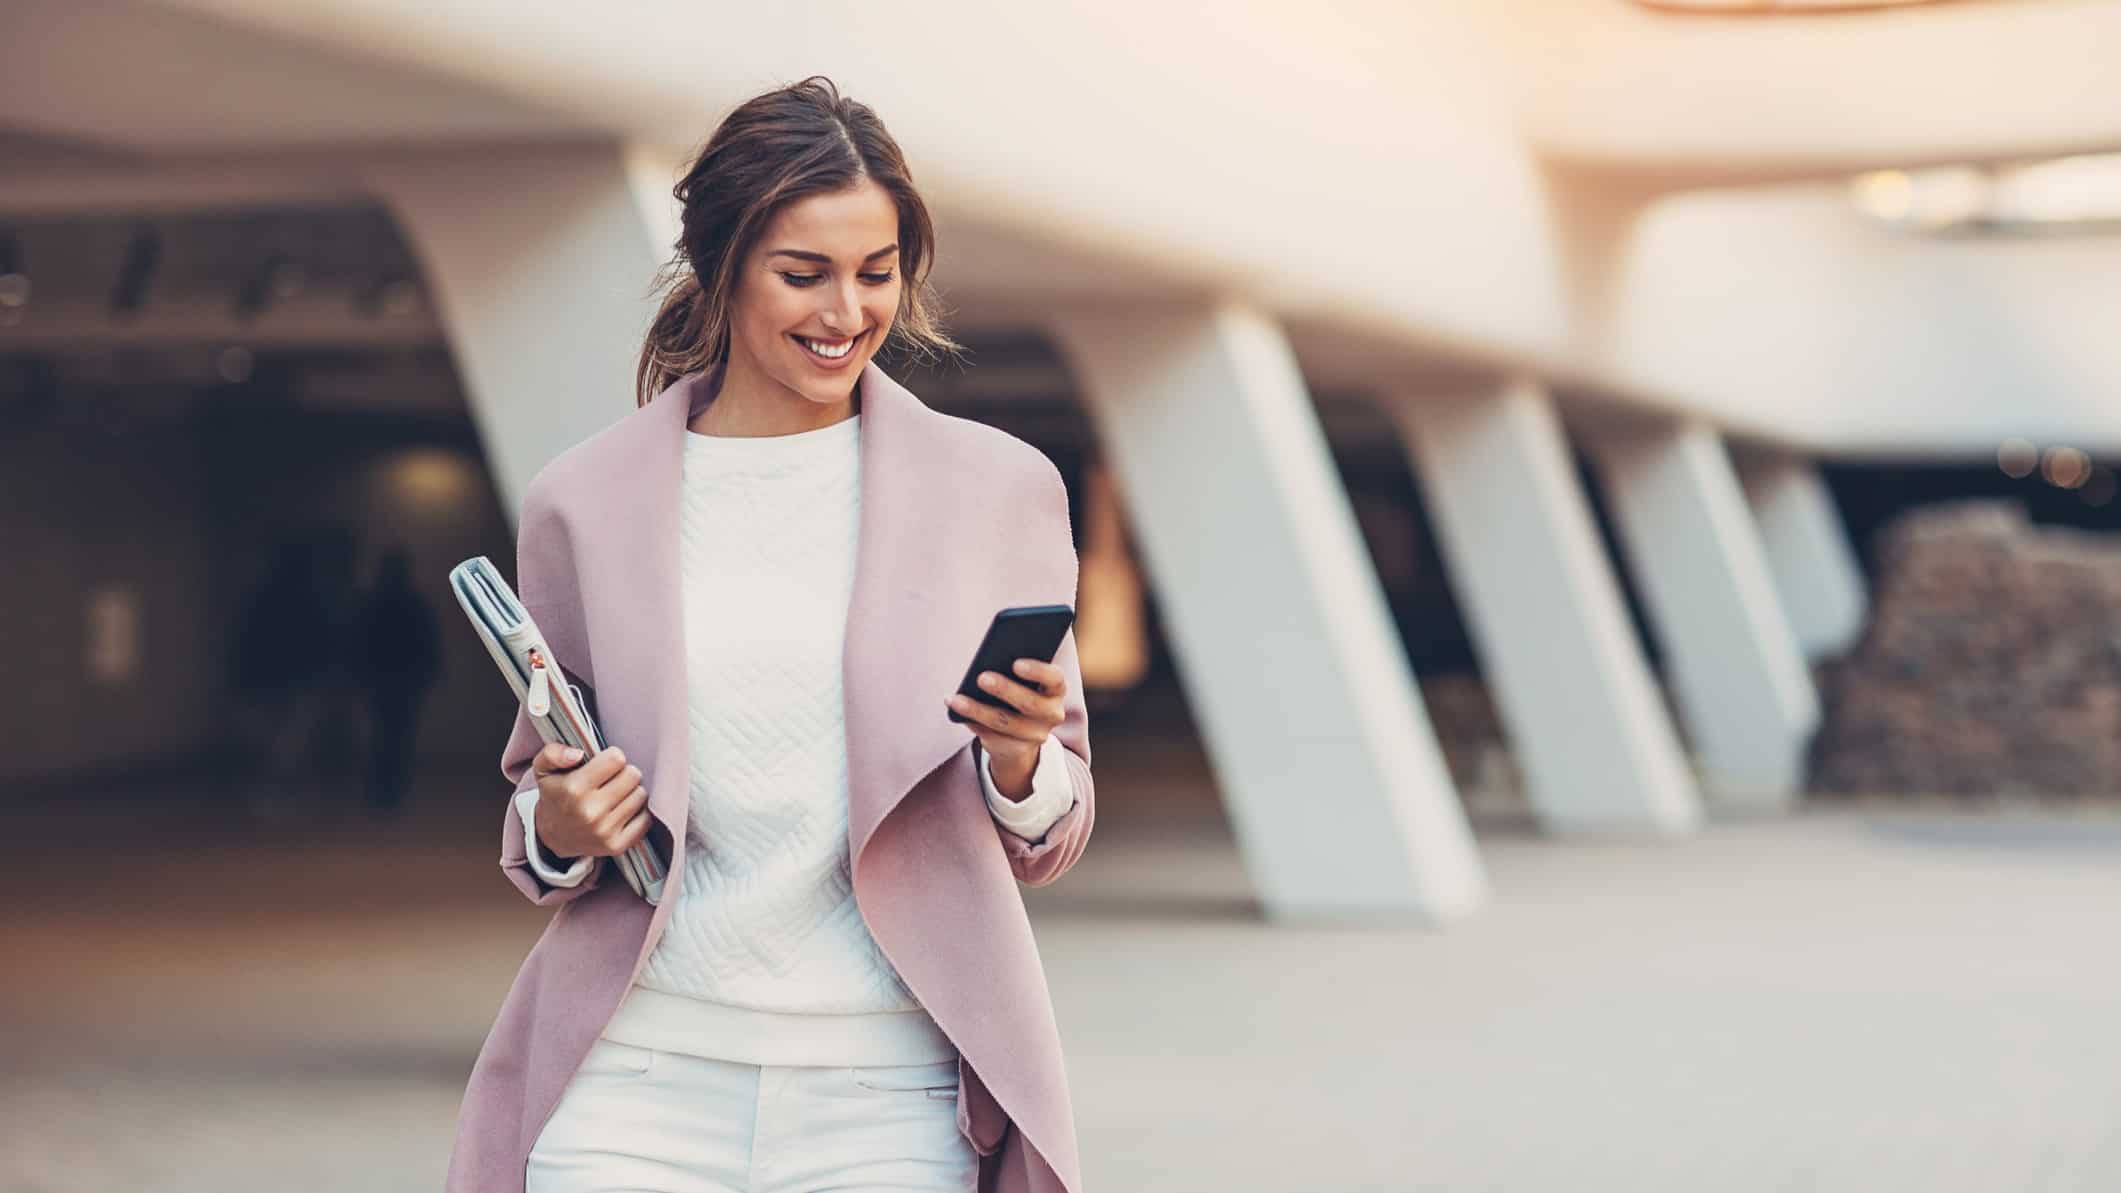 A smartly-dressed businesswoman walks outside while making a trade on her mobile phone.